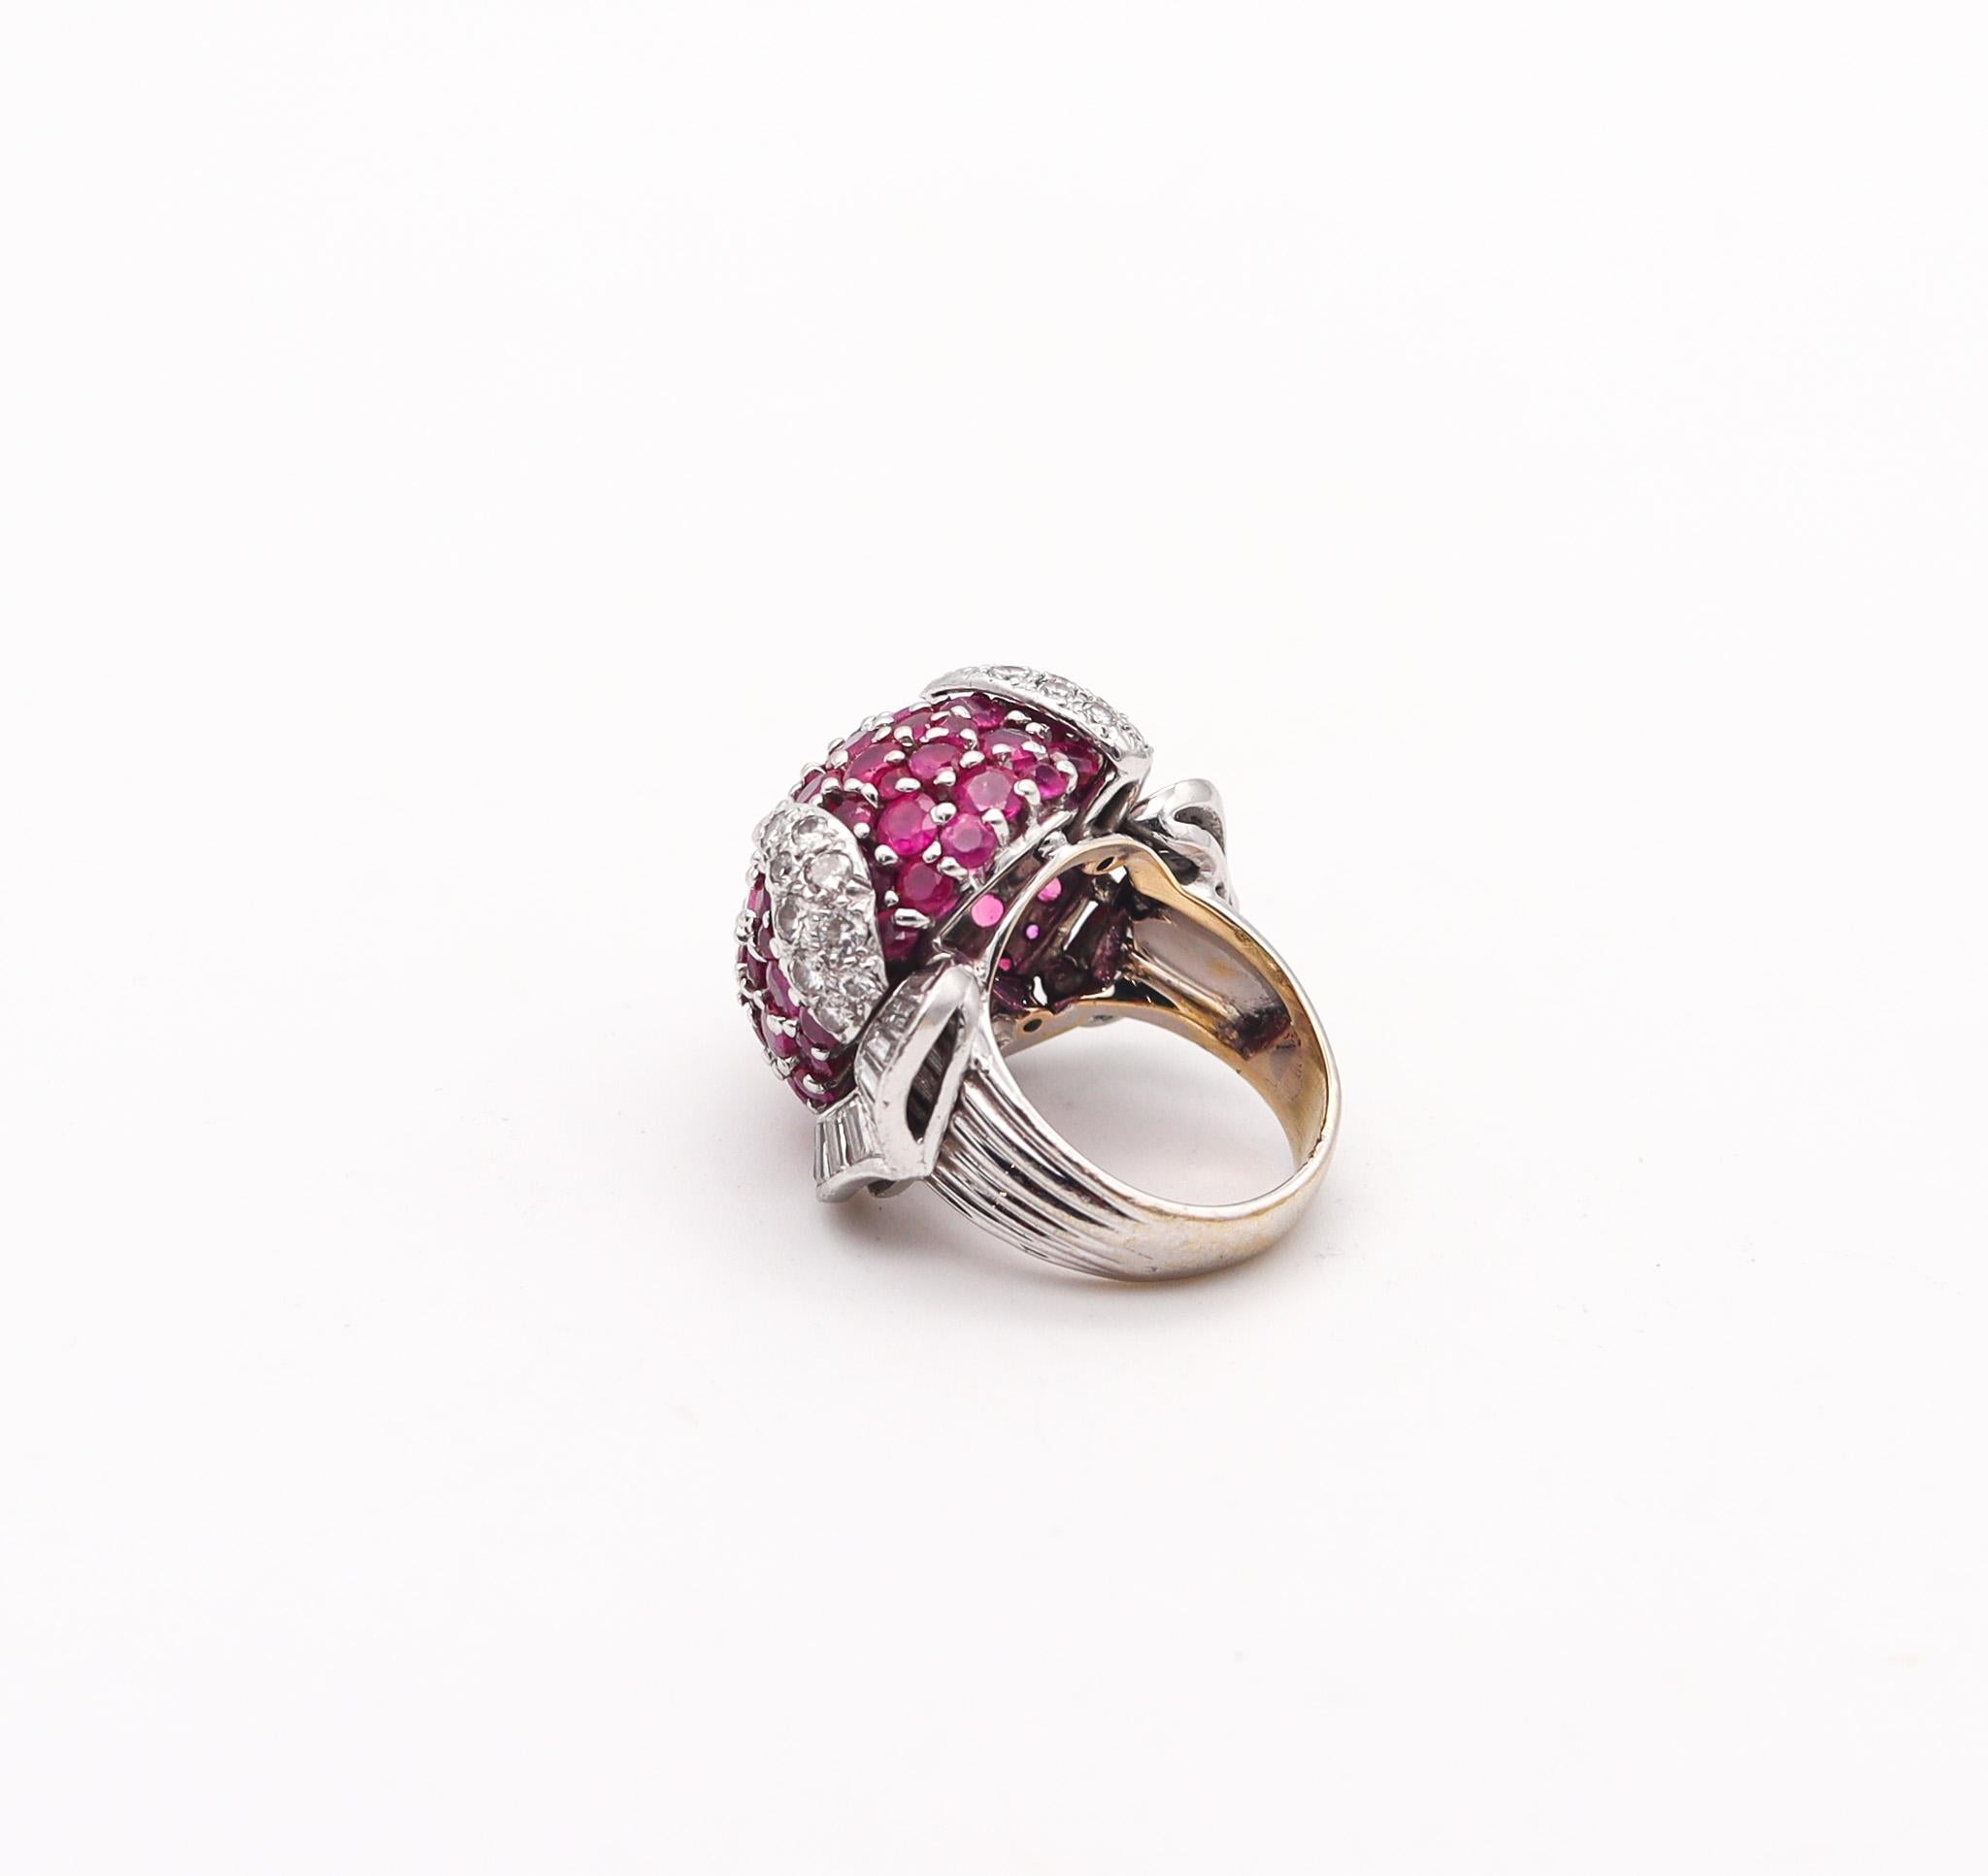 Modernist 1960 Cocktail Ring In 18Kt Gold With 15.36 Ctw In Diamonds And Rubies In Excellent Condition For Sale In Miami, FL